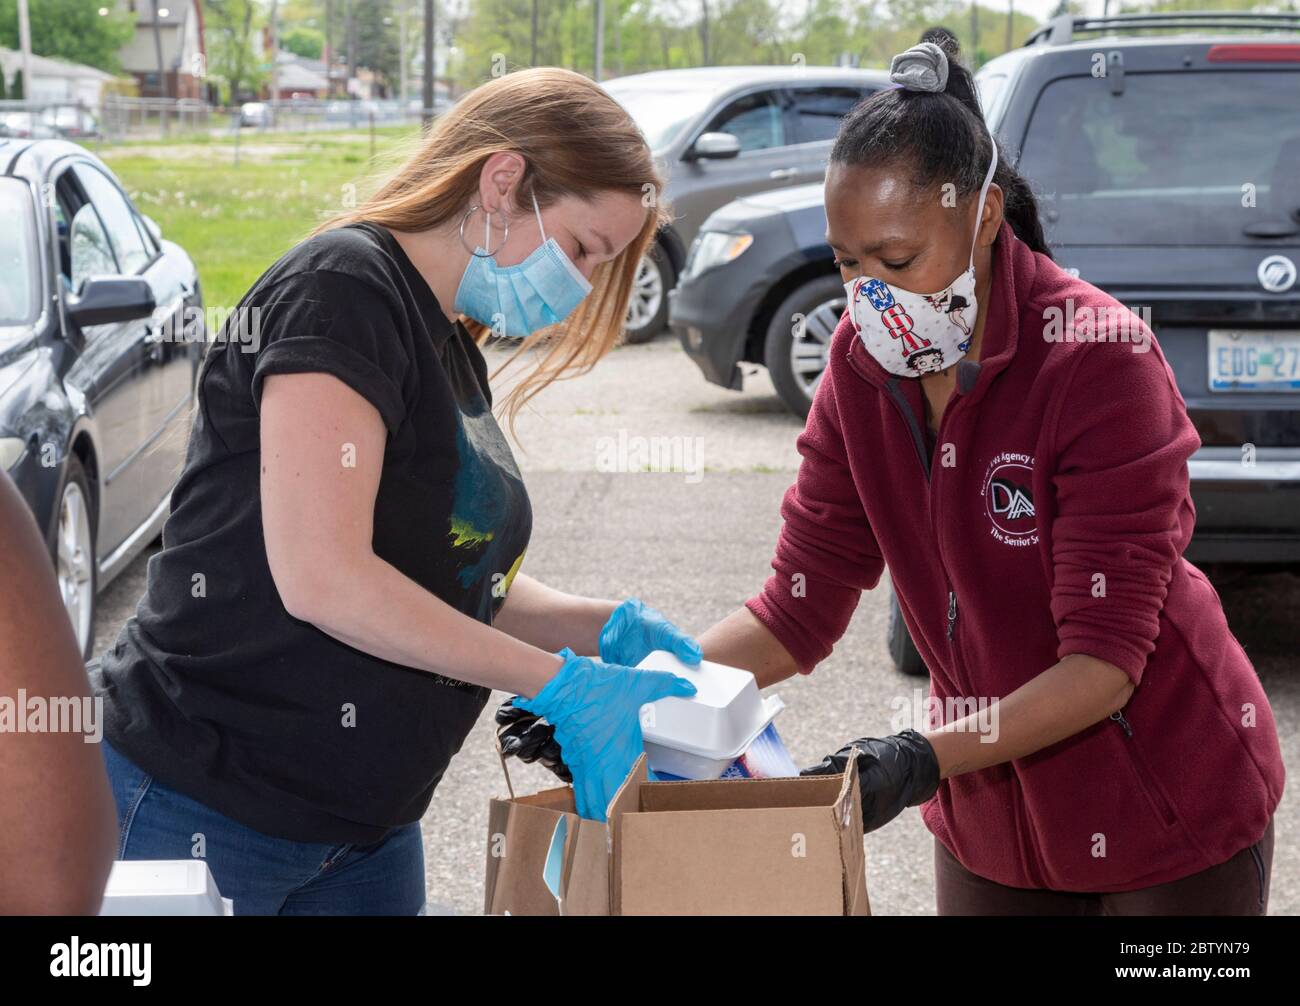 Detroit, Michigan - Volunteers package food for free distribution in a low-income neighborhood during the coronavirus pandemic. The distribution was o Stock Photo